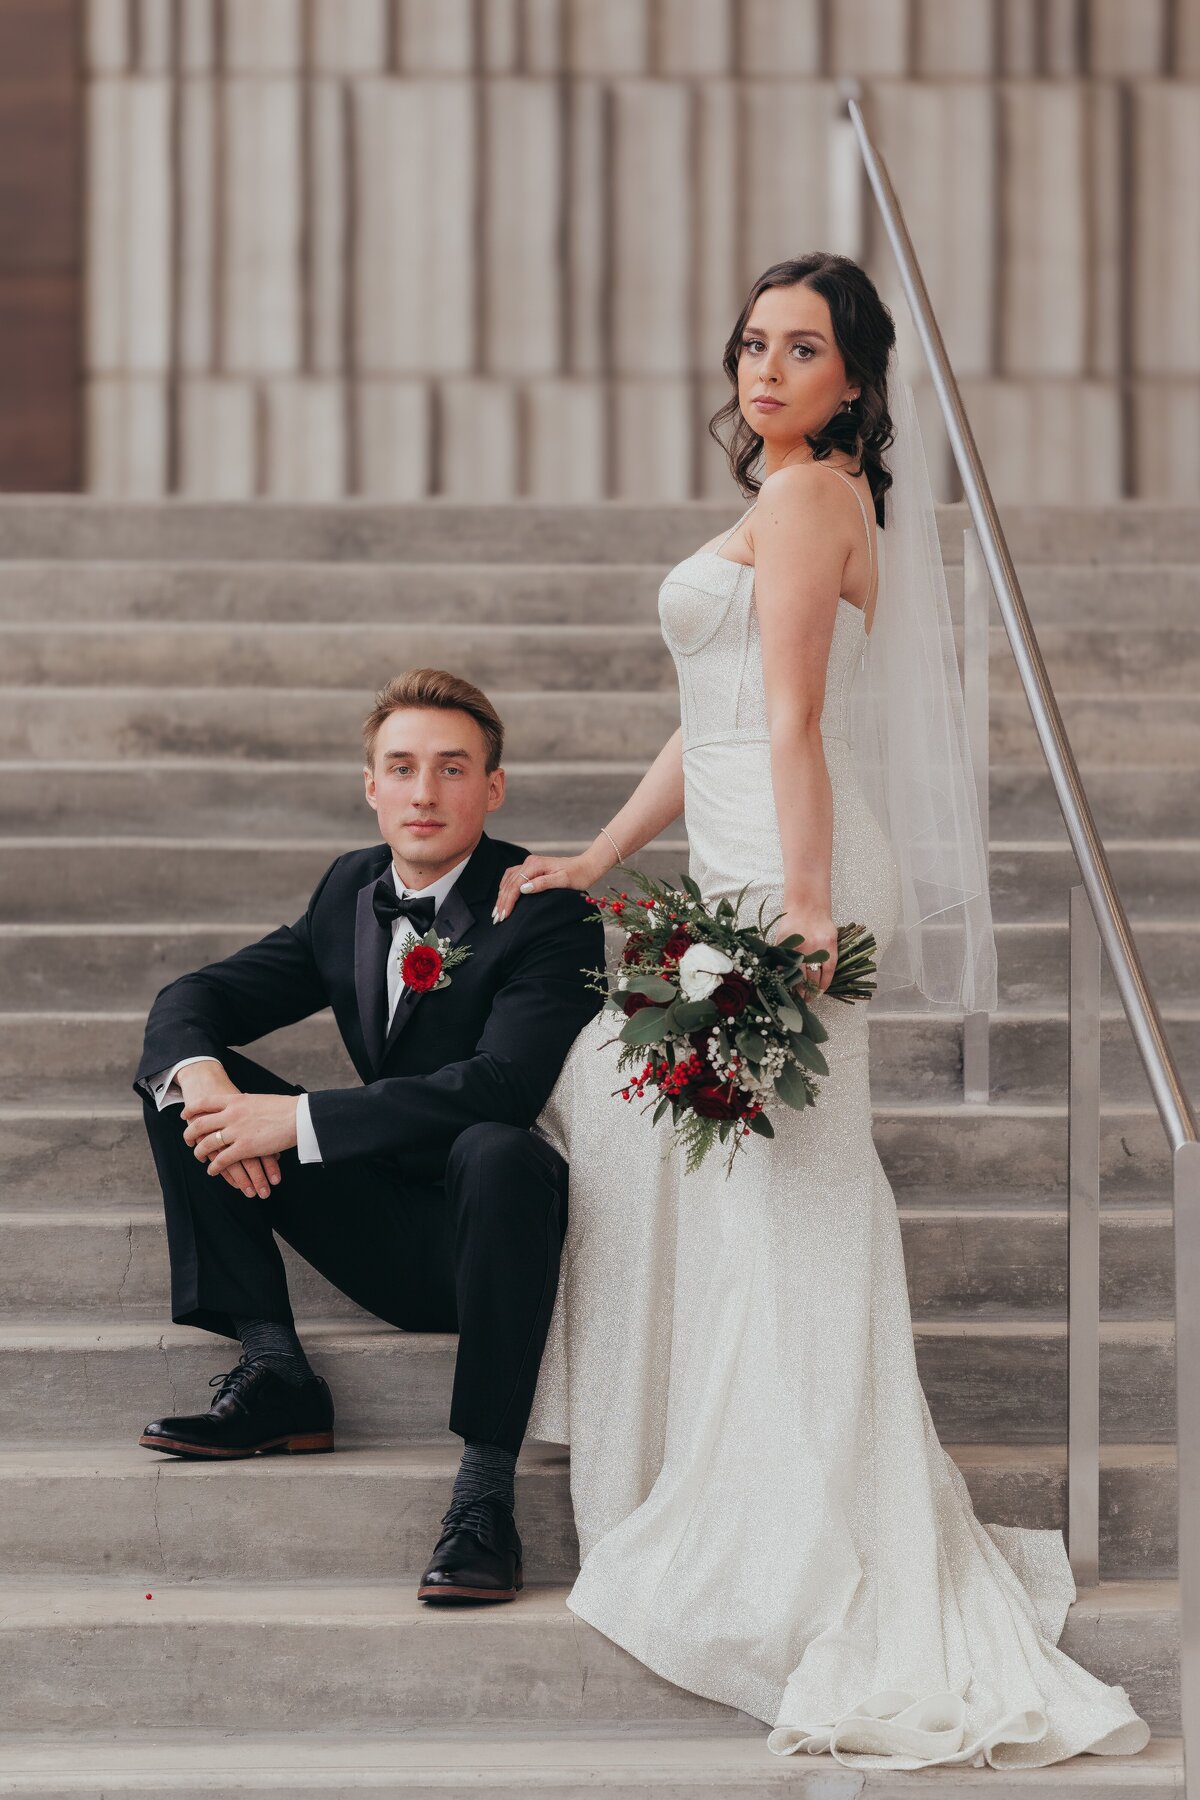 A bride and groom elegantly dressed, sitting on steps at a park farm winery wedding, with the bride holding a bouquet and looking at the camera.